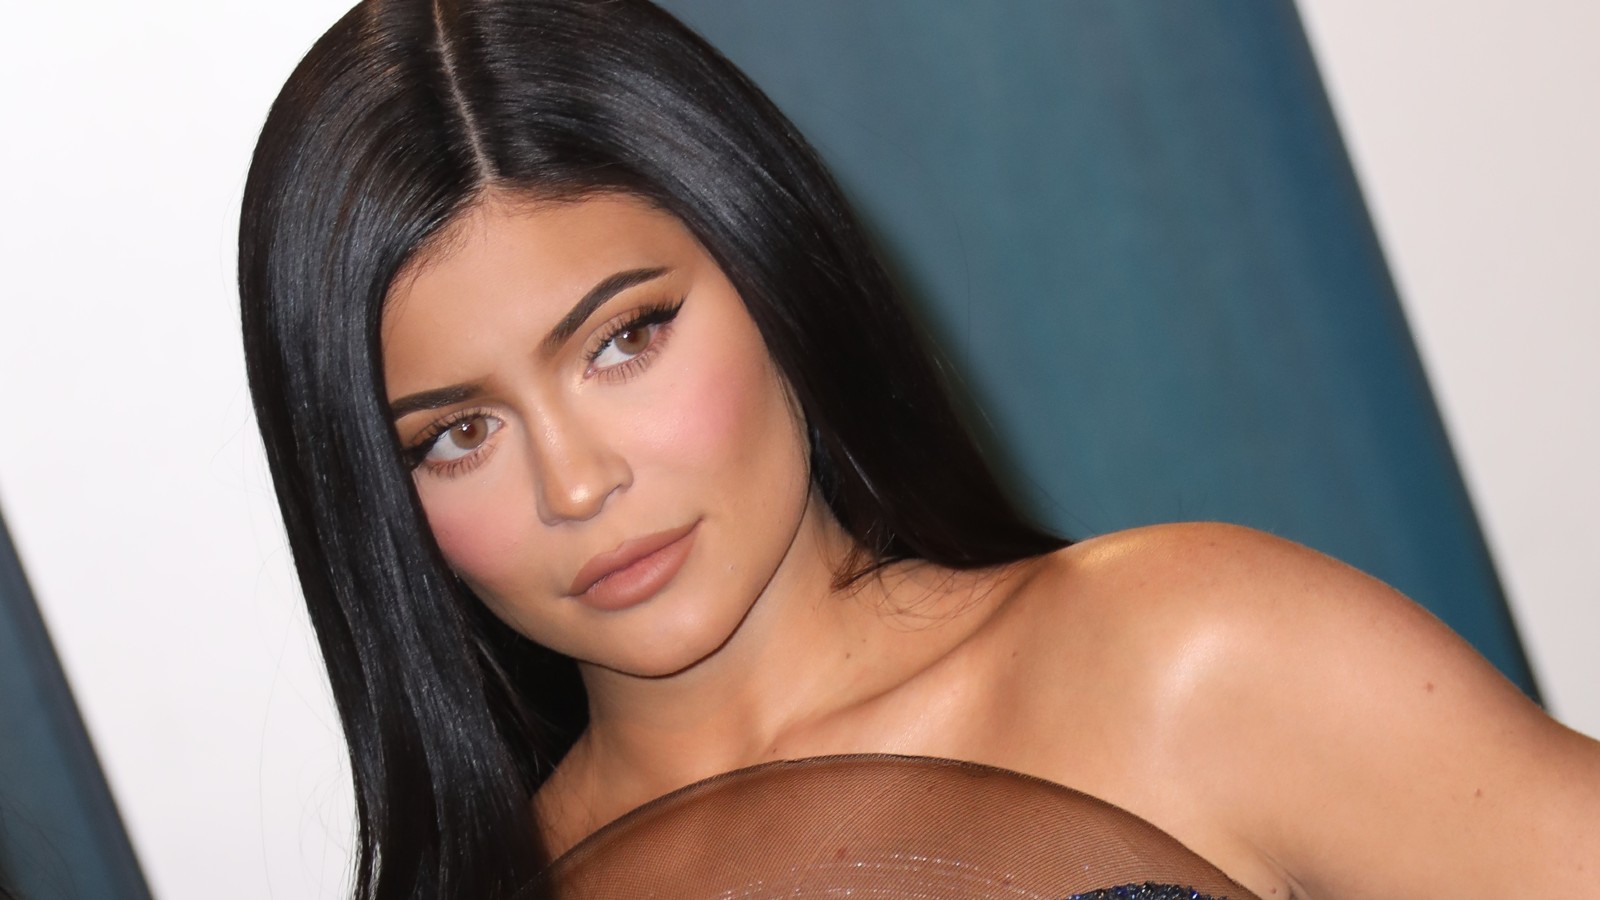 Kylie Cosmetics Relaunches with New Clean Formulas - Kylie Jenner